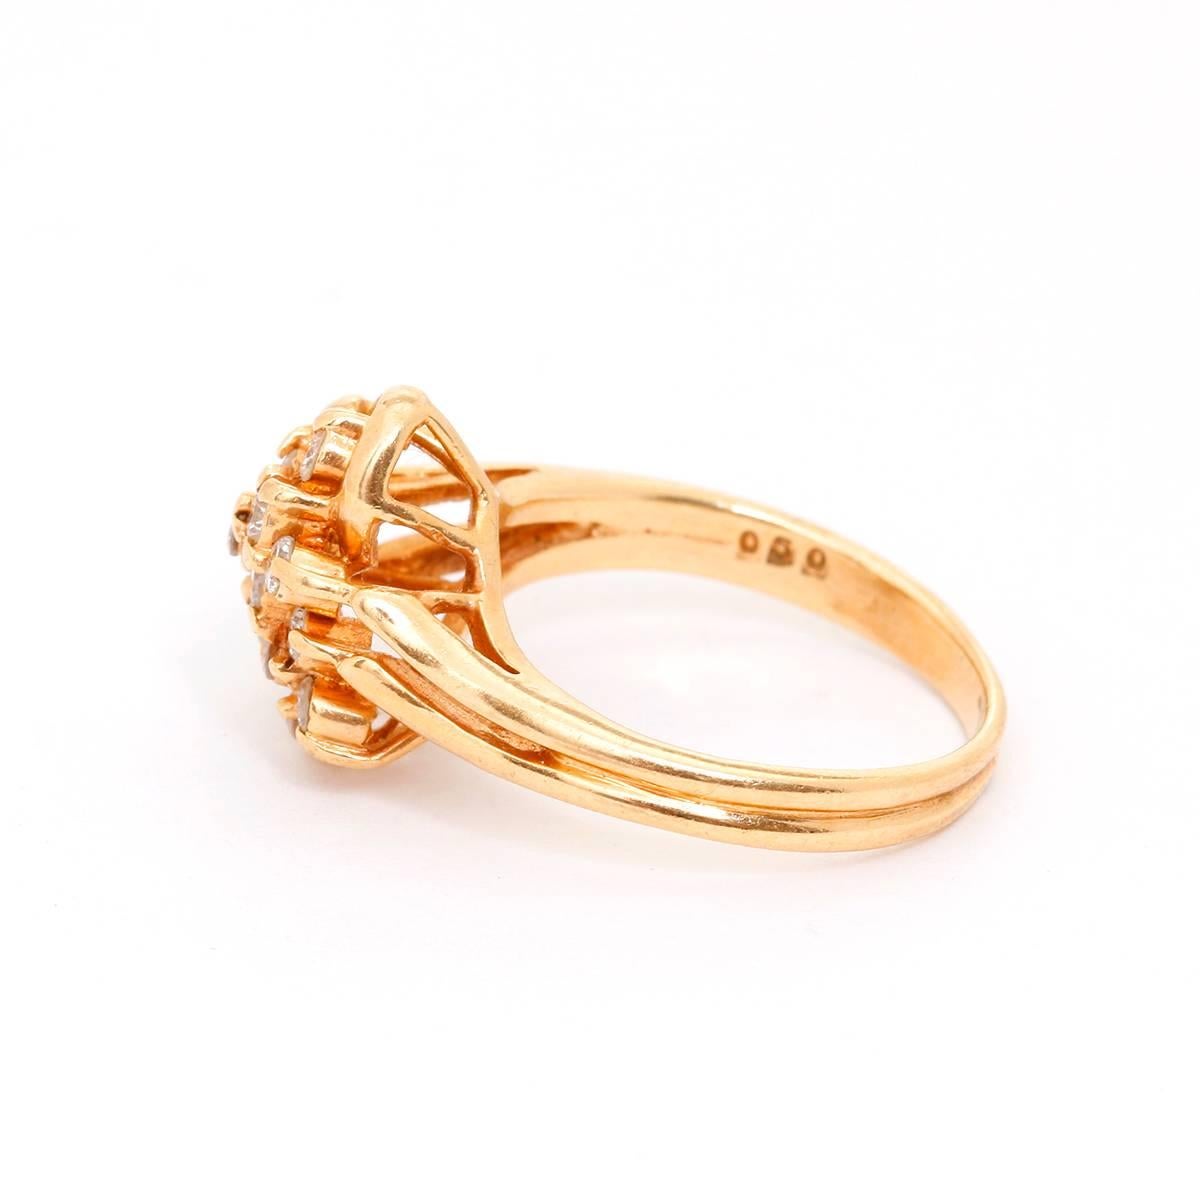 14K Yellow Gold Heart Diamond Ring Size 5.5 - . Beautiful heart shaped bouquet with diamonds. Total weight 3.1 grams. Perfect as a gift!.